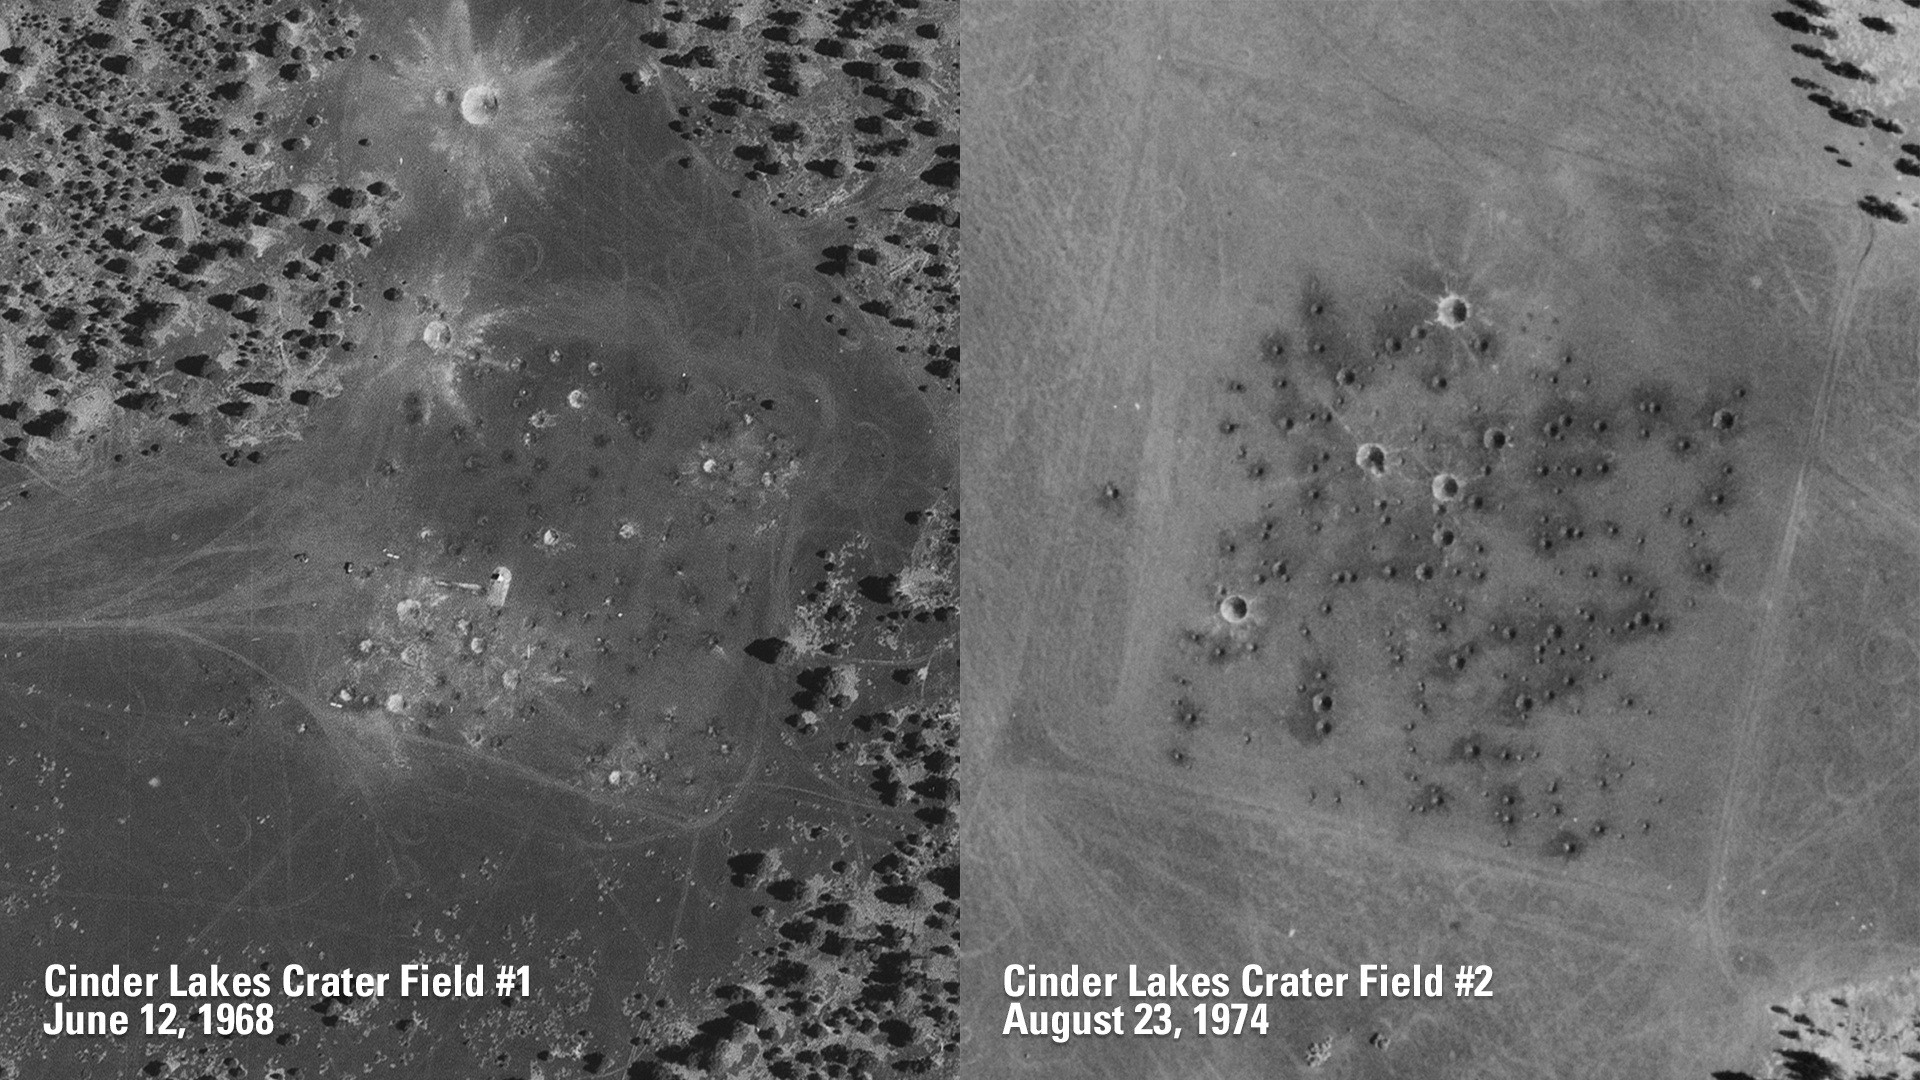 Cinder Lake crater fields - 1974